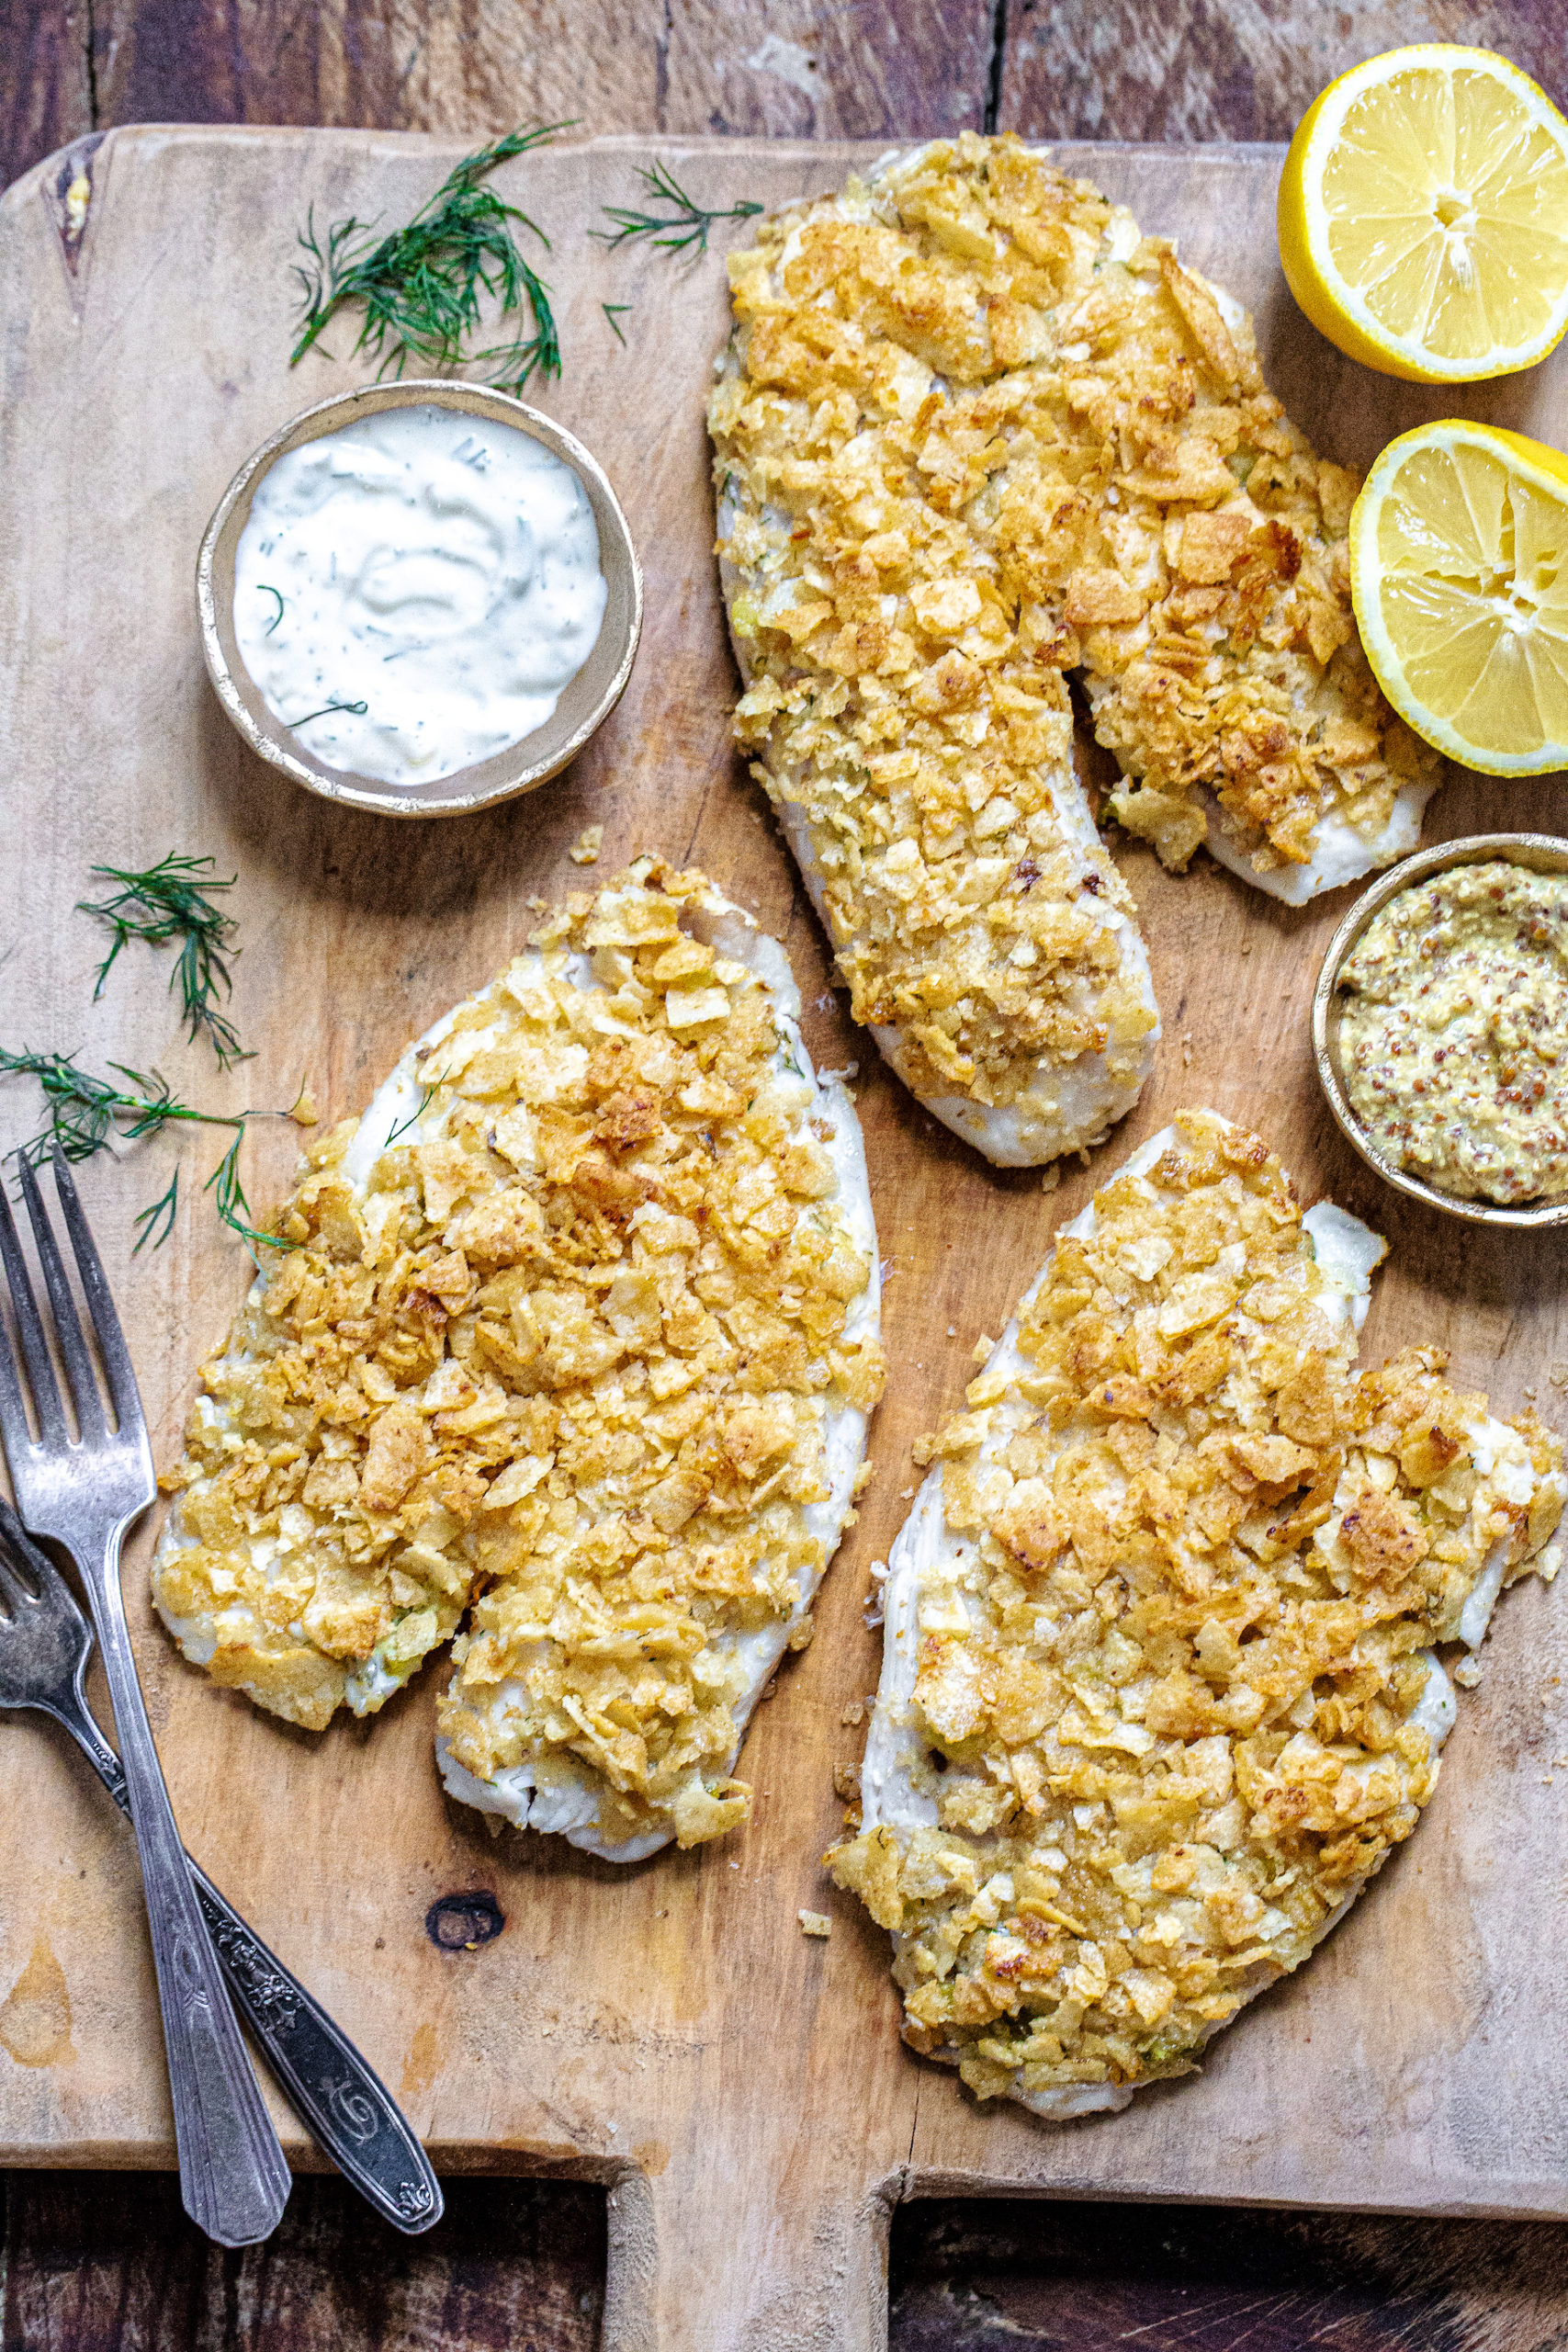 Easy Baked Fish and Chips (Salt and Vinegar Version)